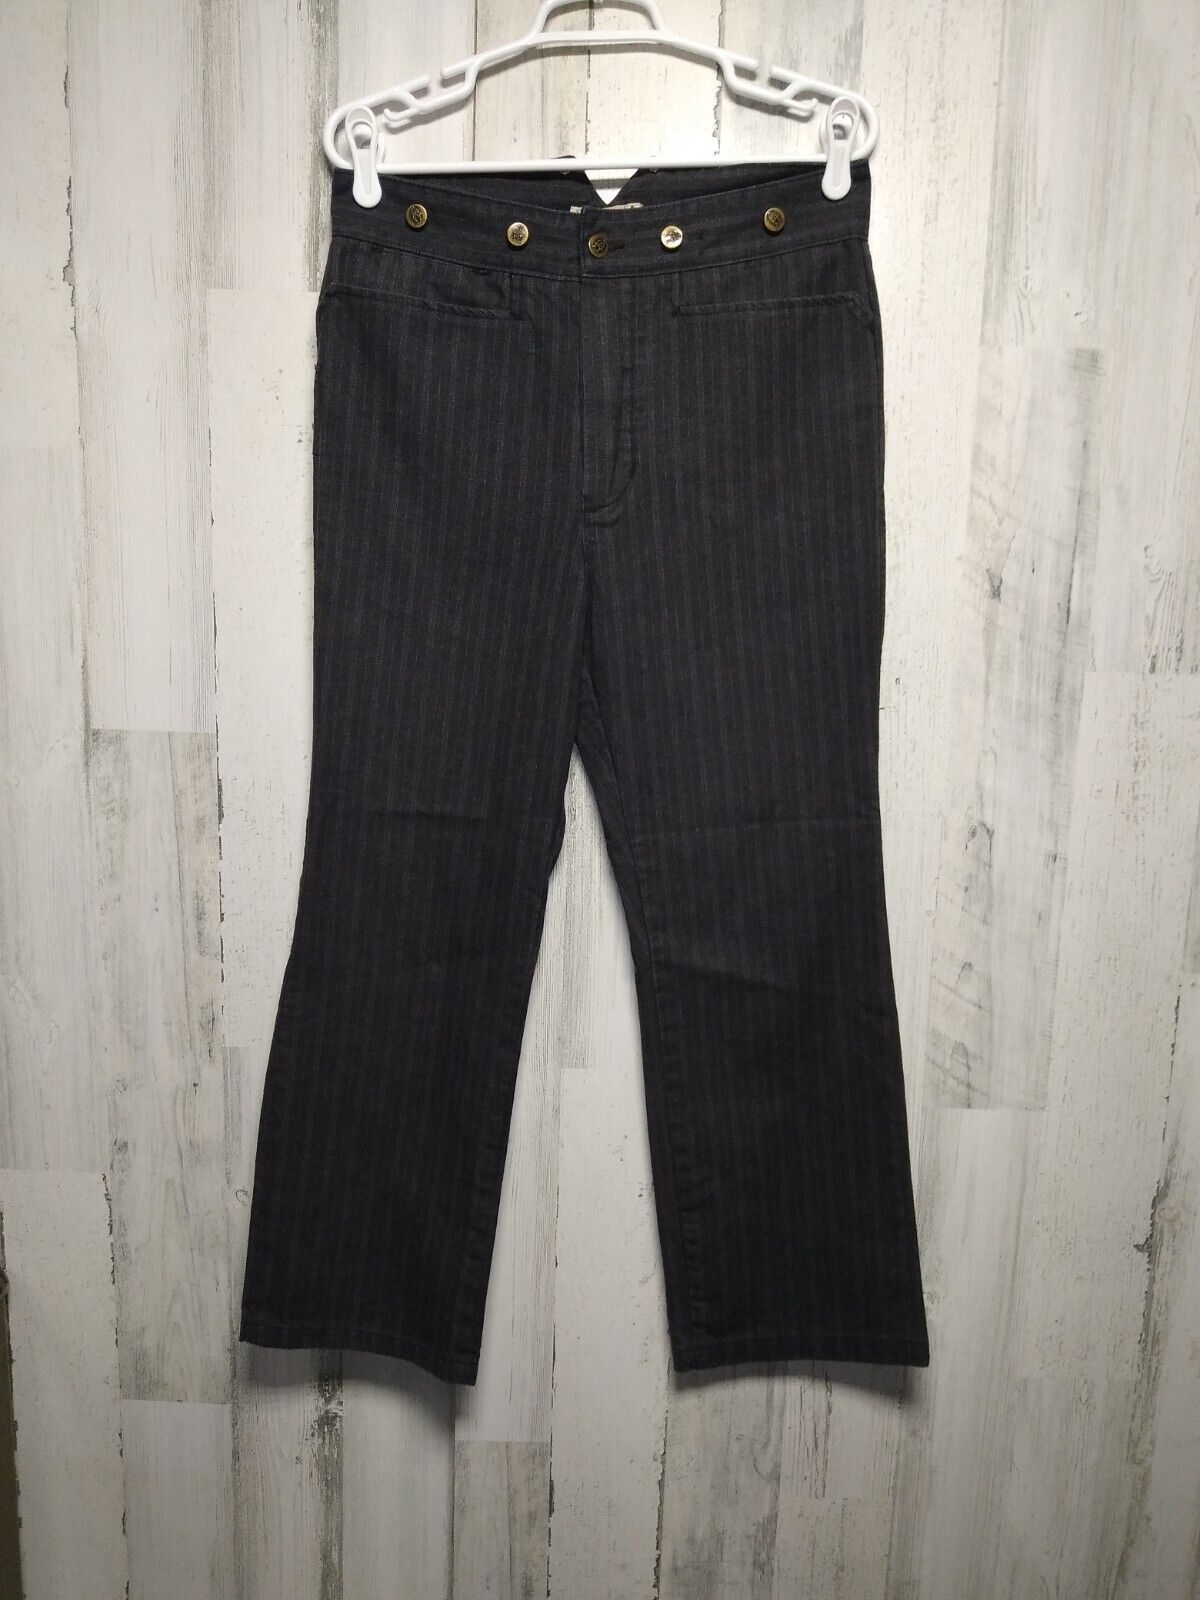 Classic Old West Style Pinstripe Reenactment Pants 30x26